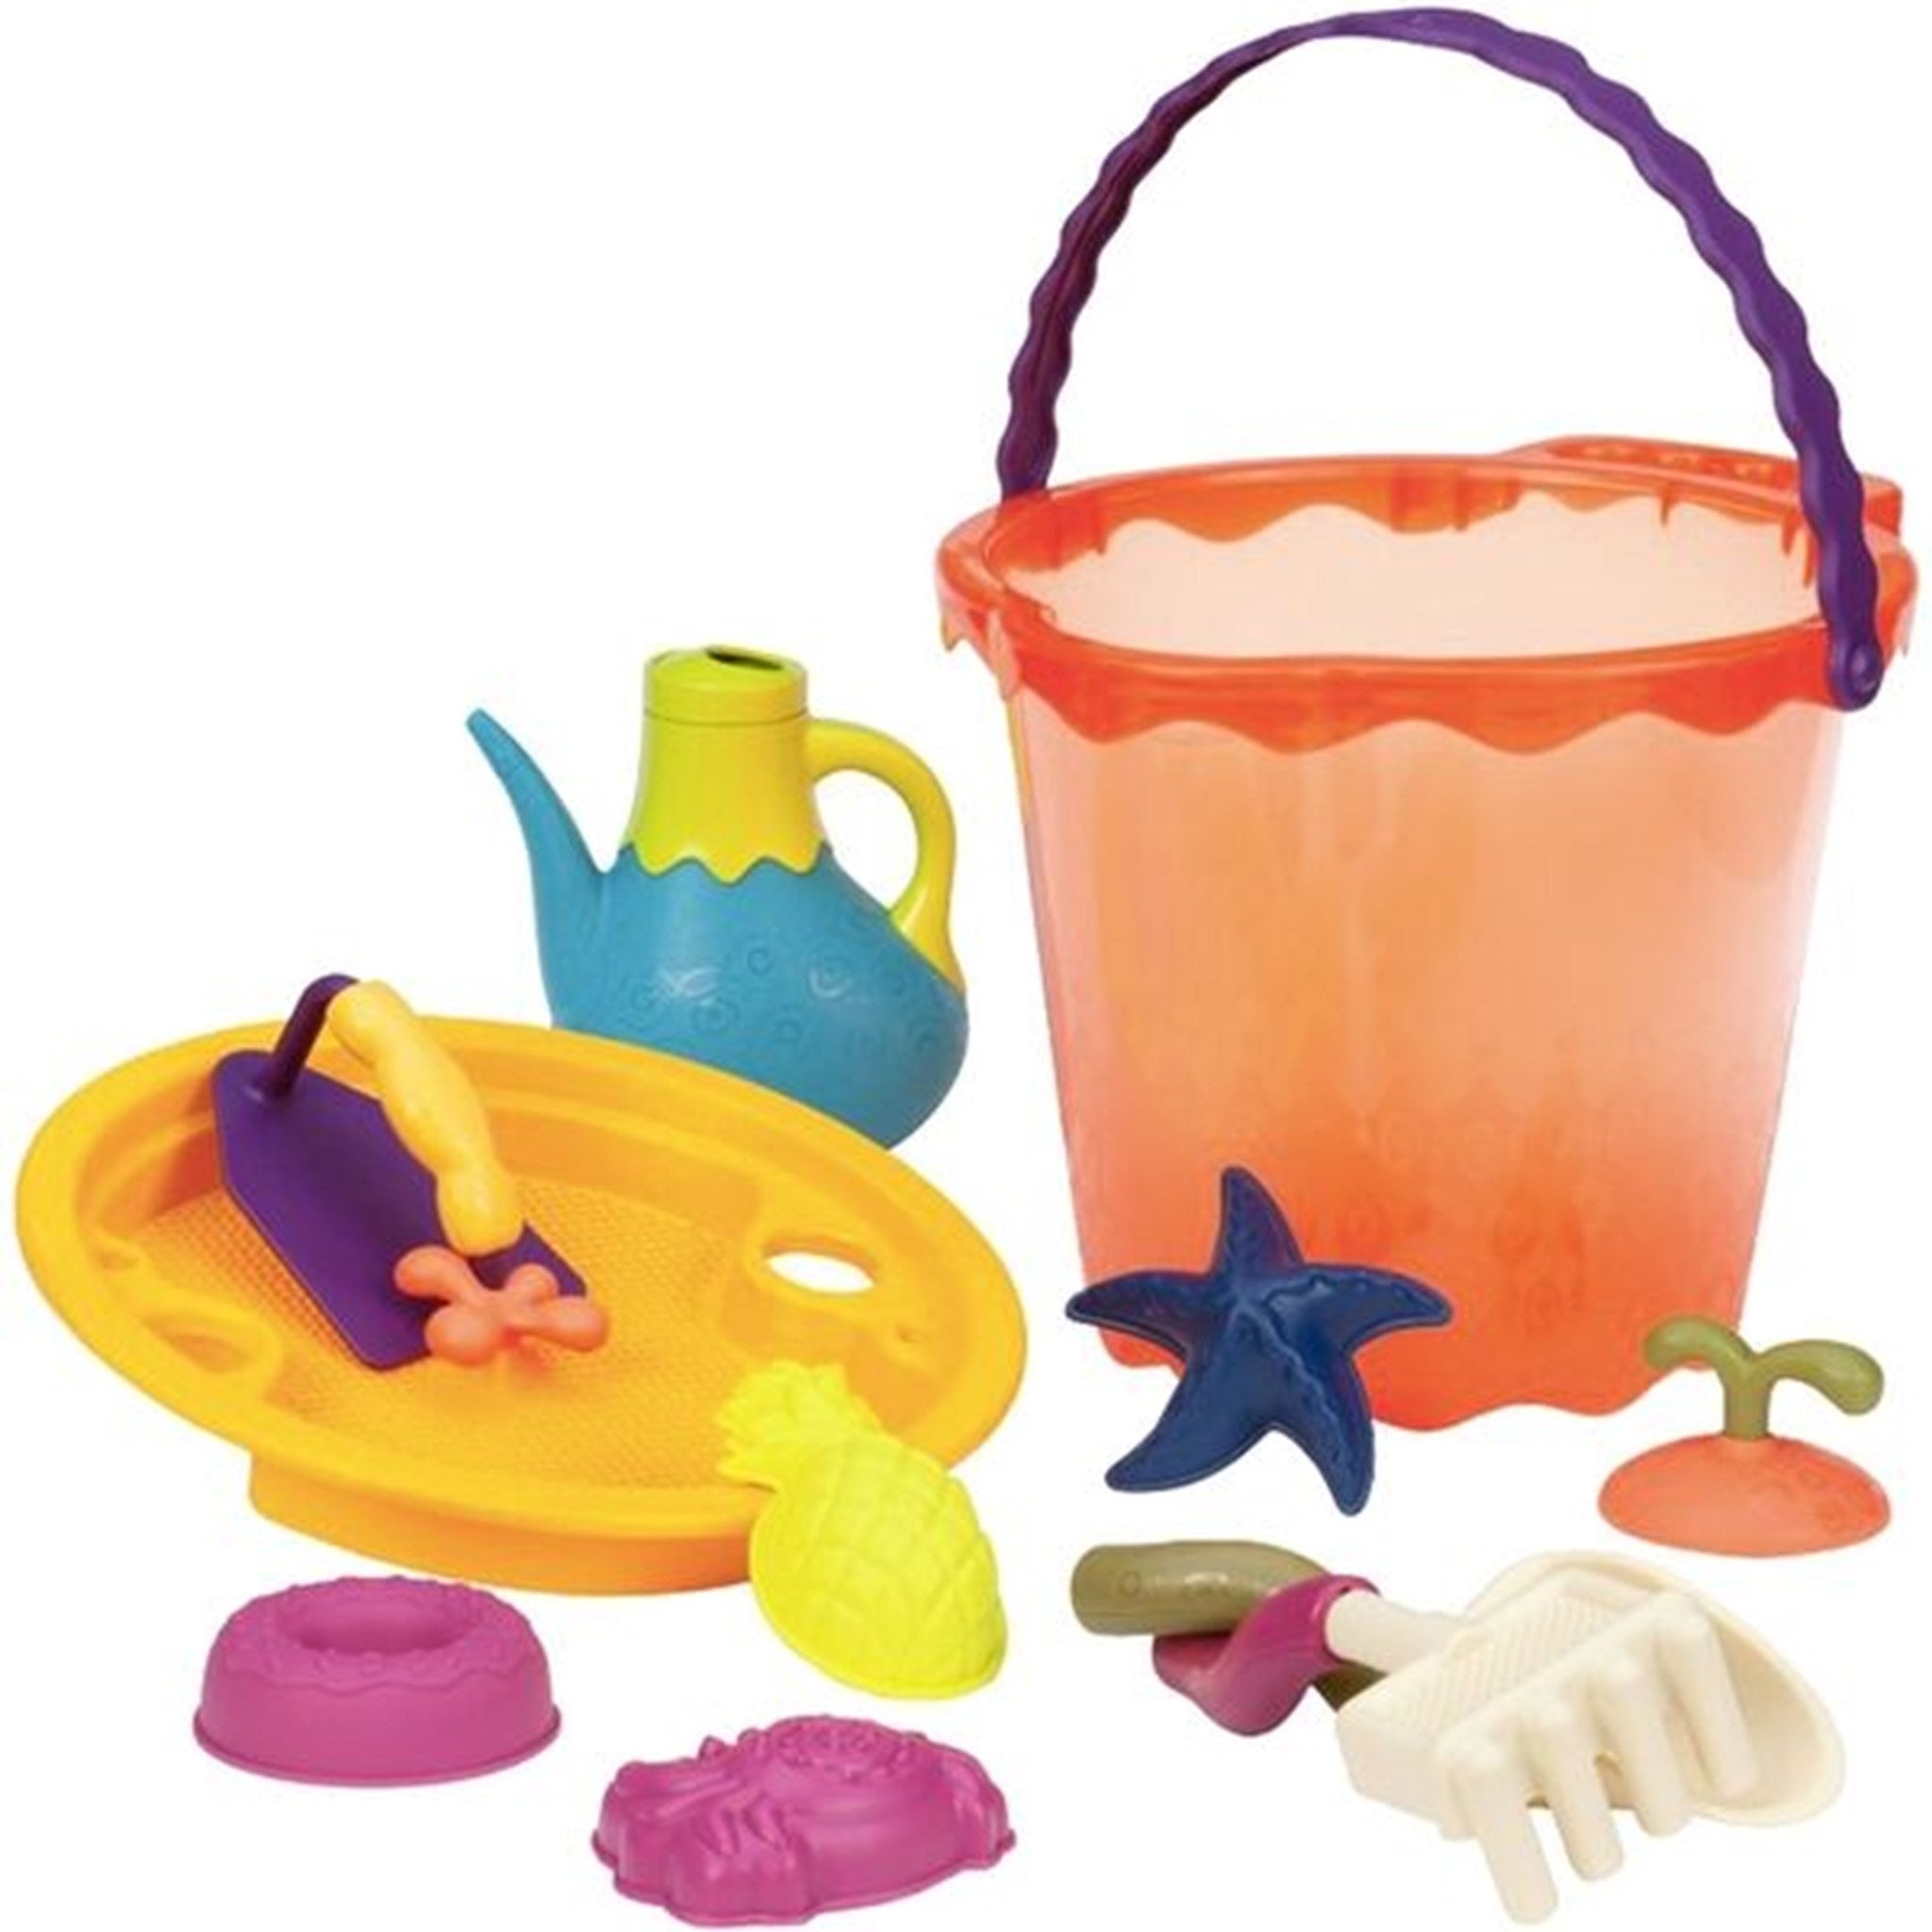 B-toys Shore Thing - Bucket Set Red